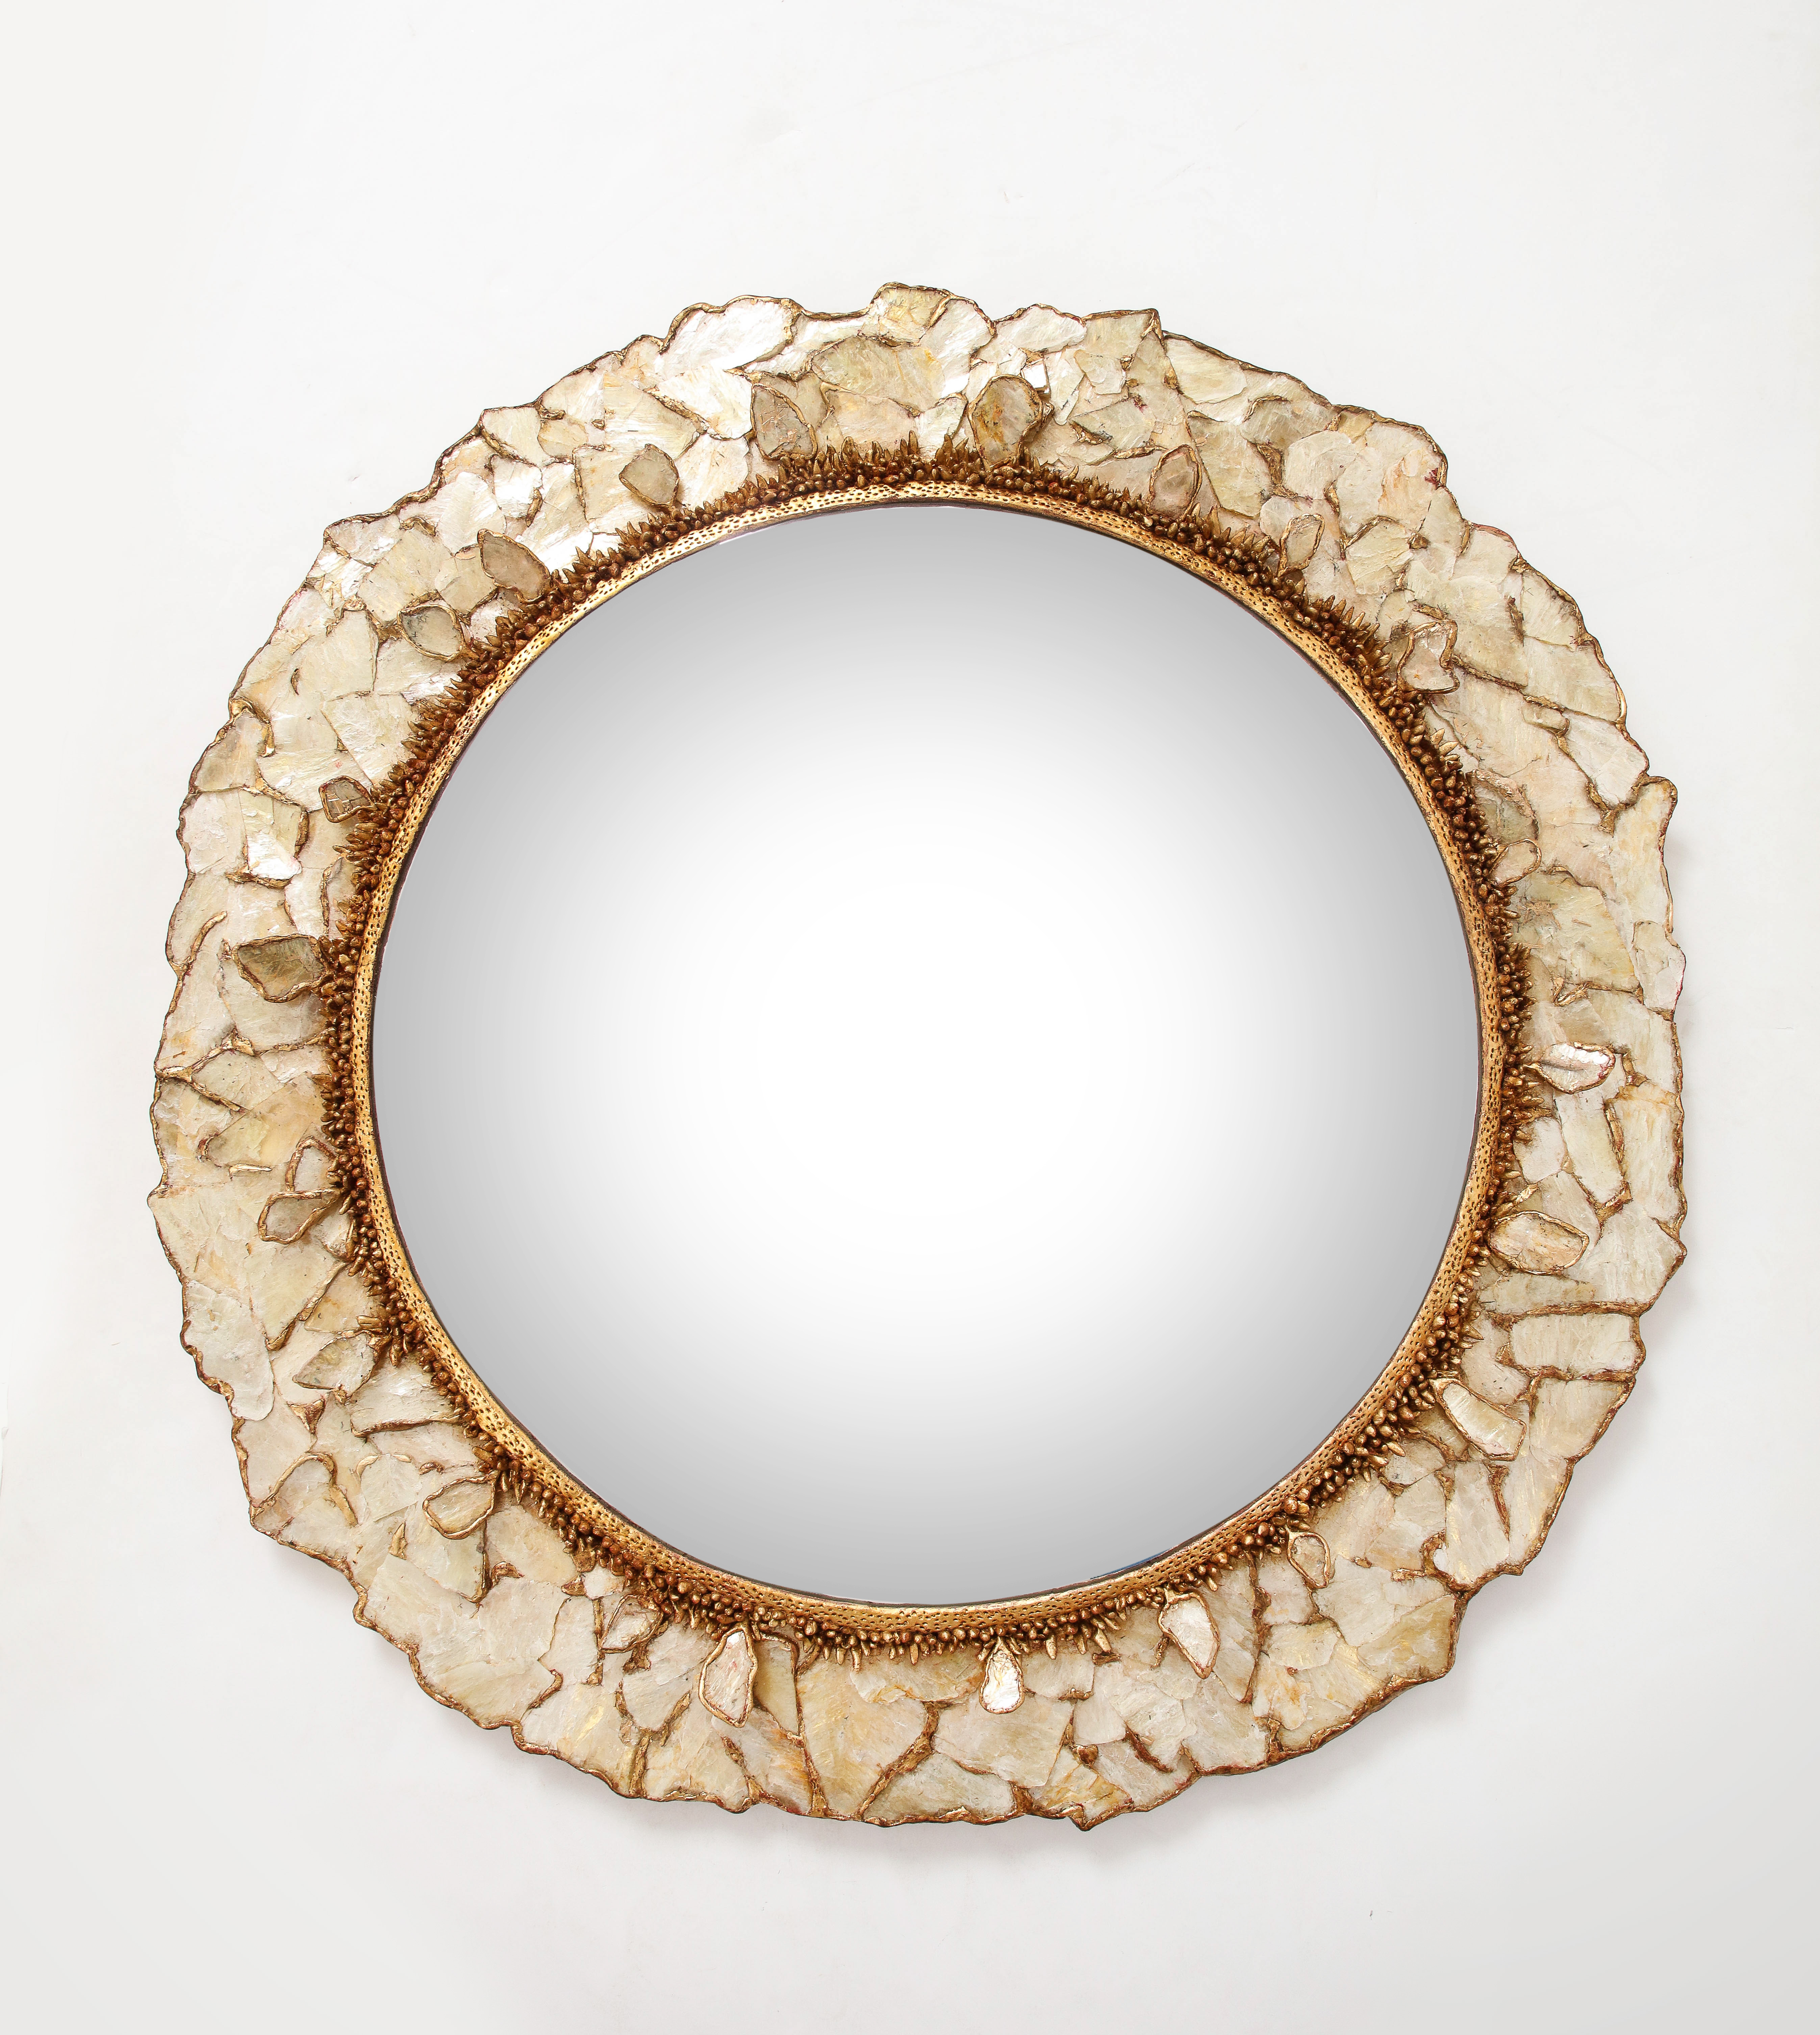 An unique artist mirror. Made of Mica and gilded resin